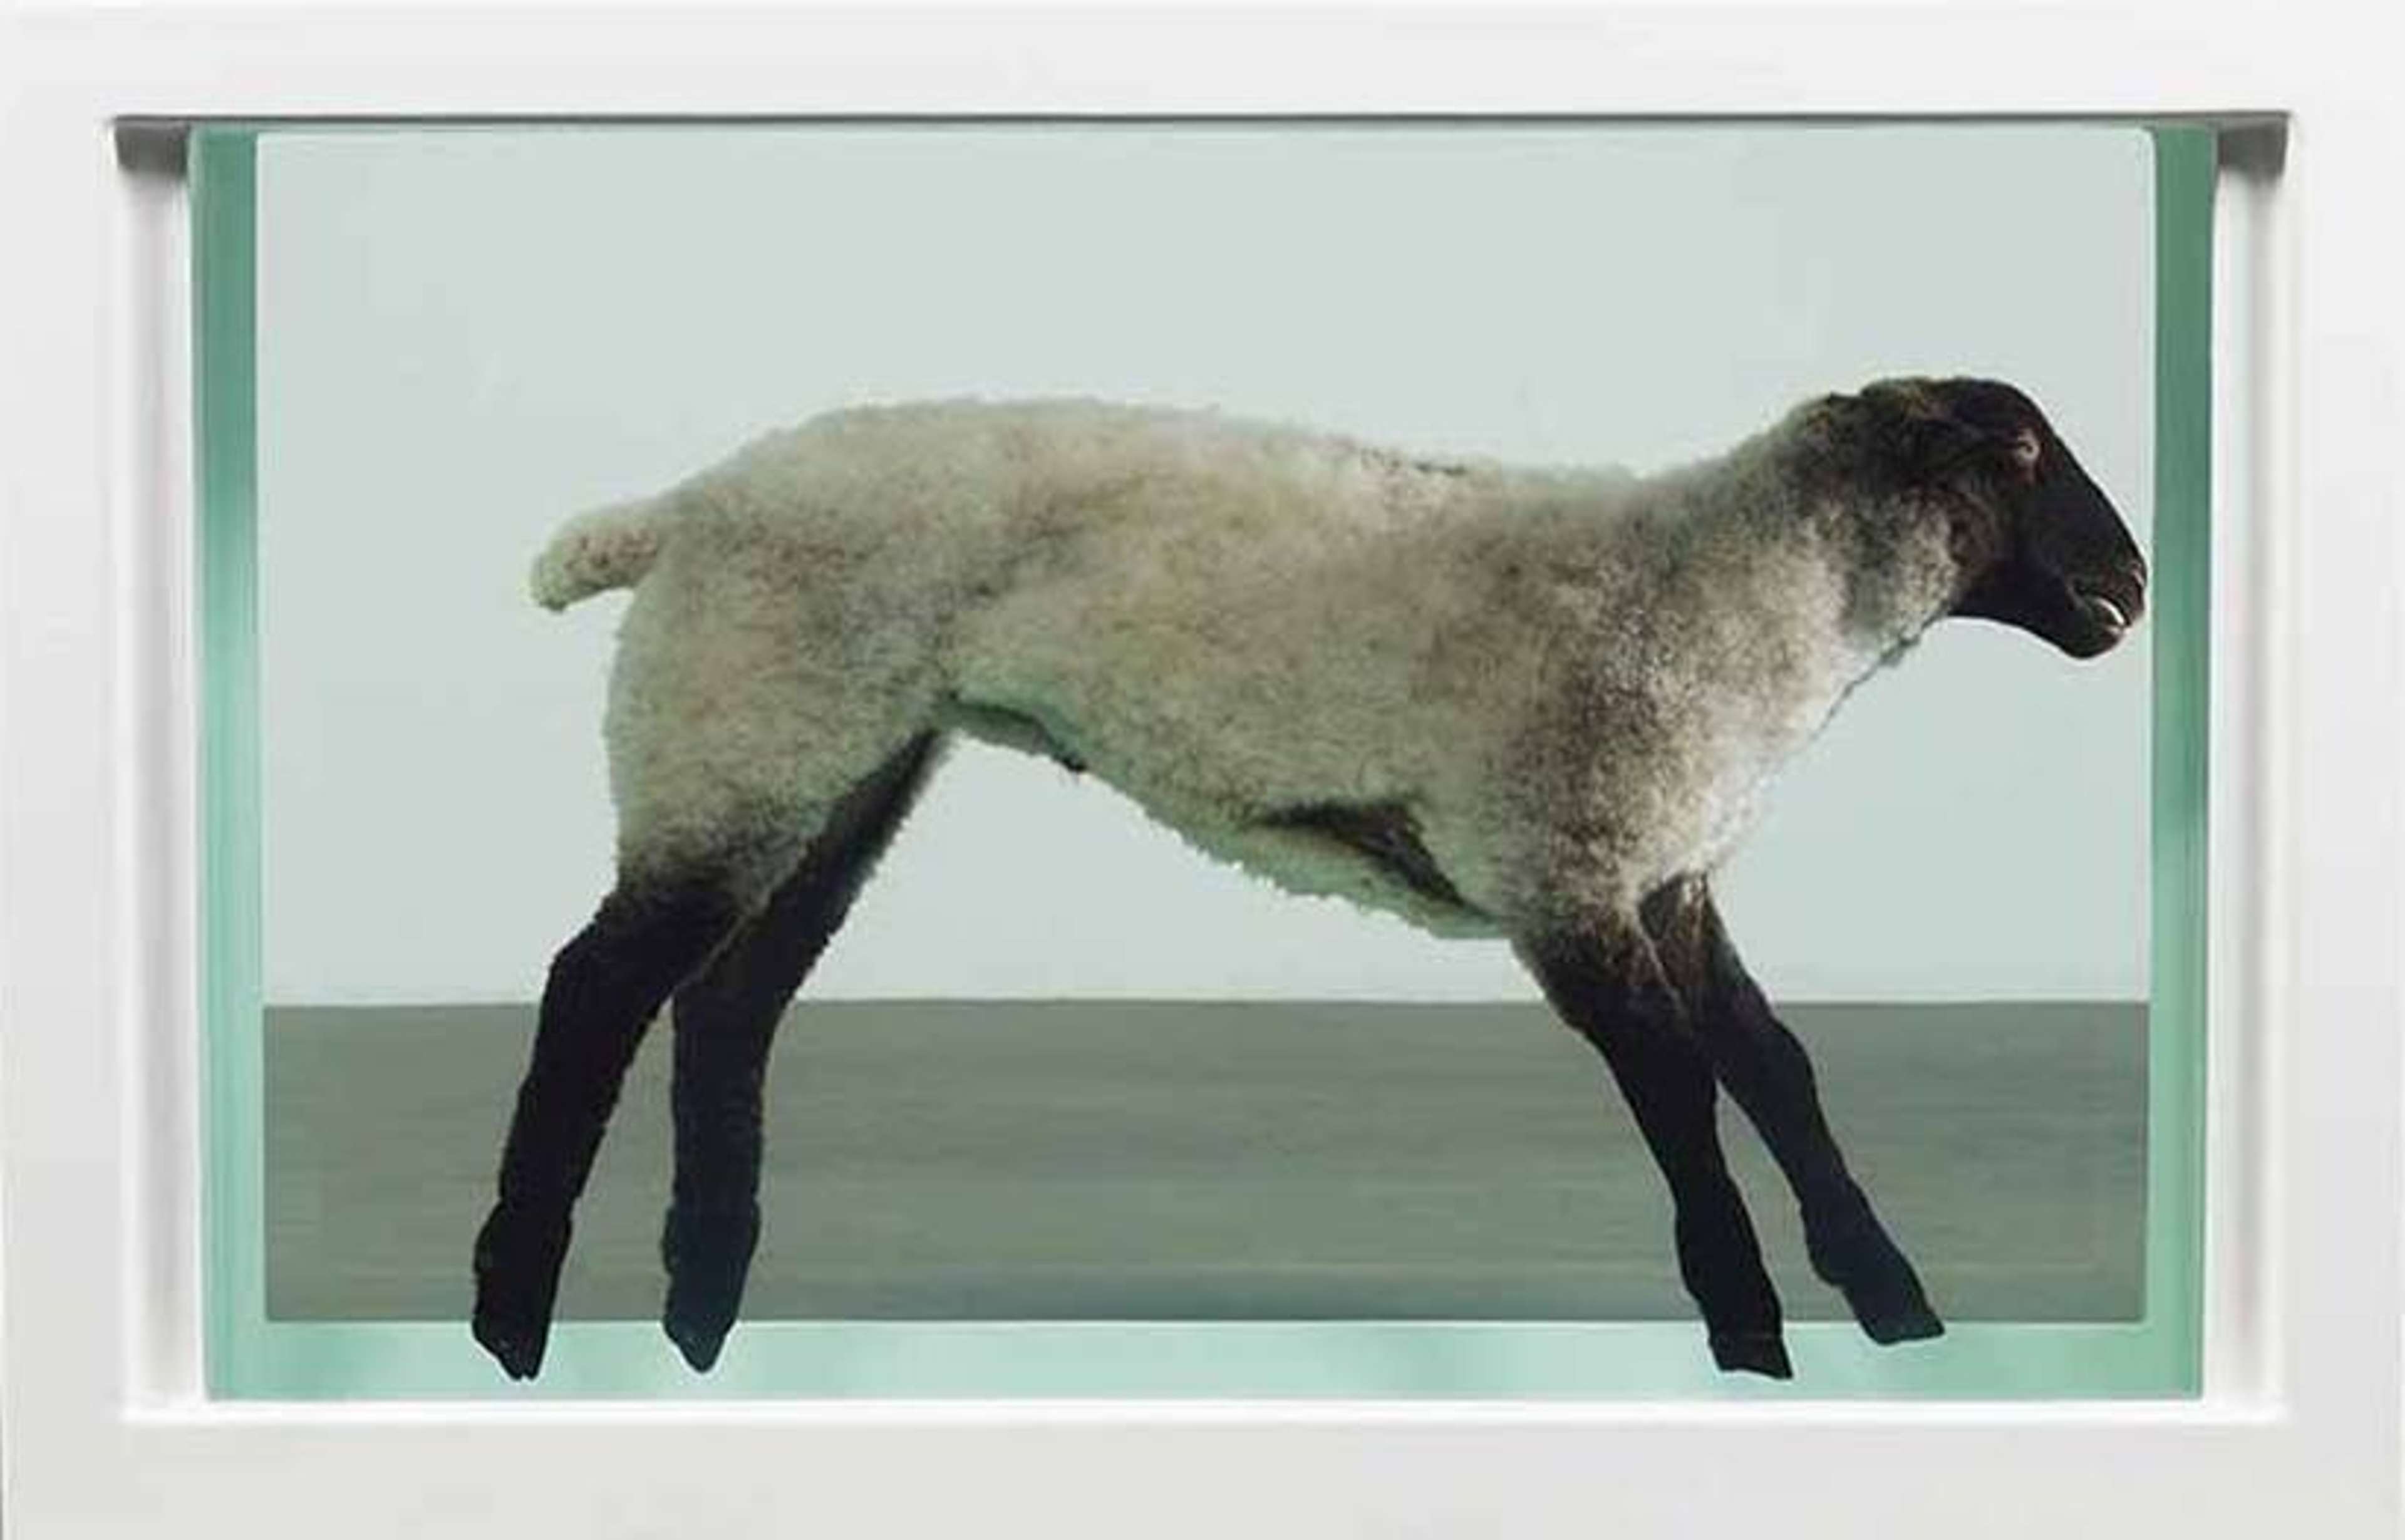 Away From The Flock by Damien Hirst